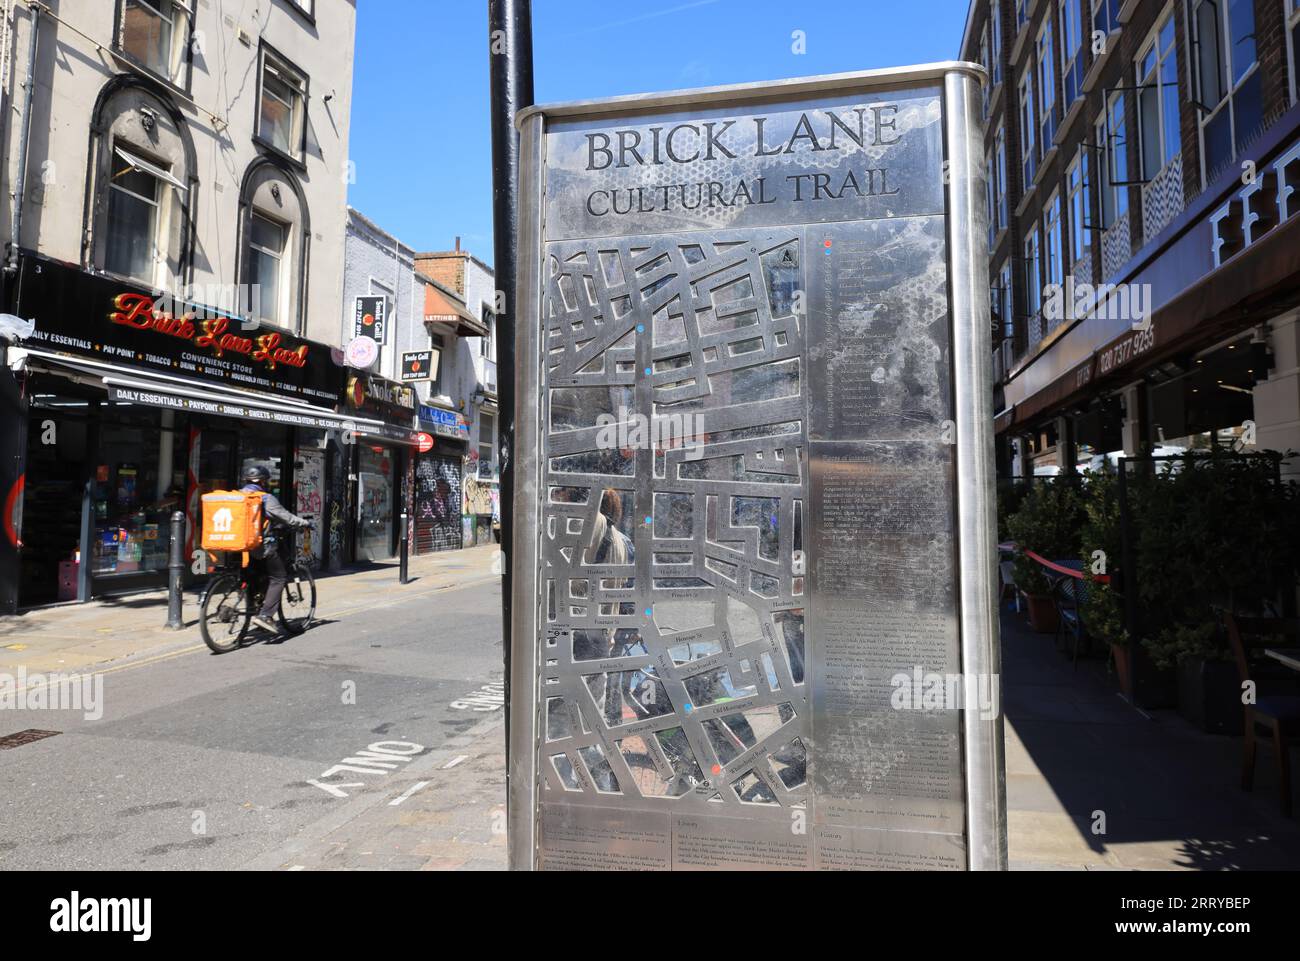 Information sign for Brick Lane Cultural Trail in London's vibrant East End, UK Stock Photo